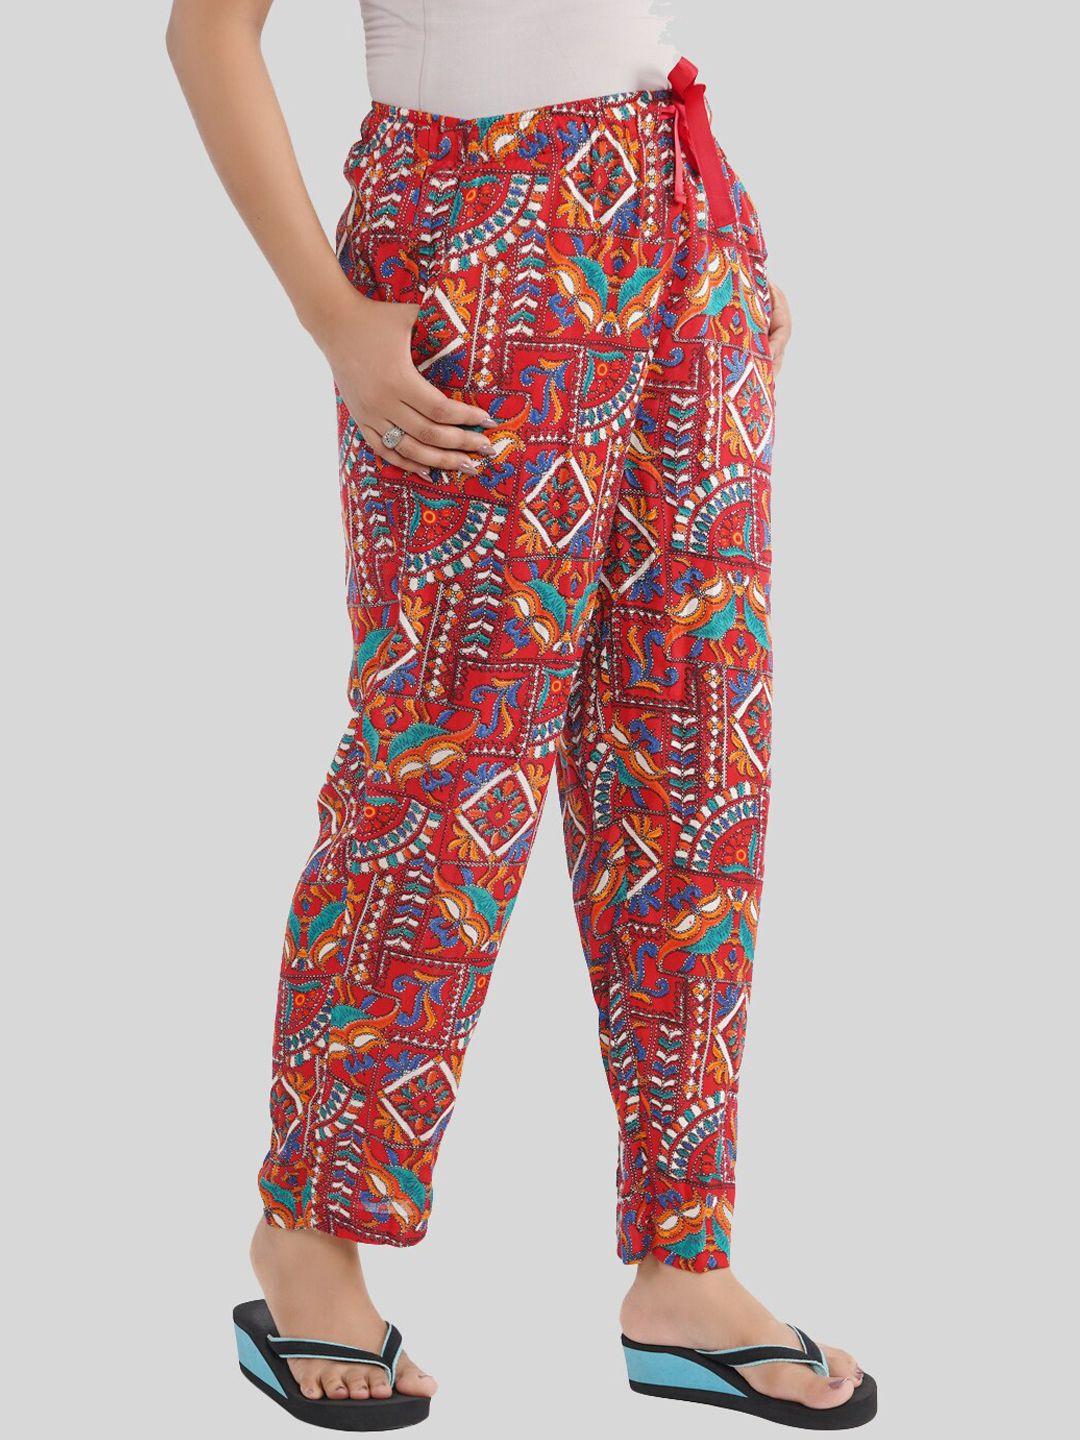 style-shoes-women-printed-mid-rise-lounge-pants